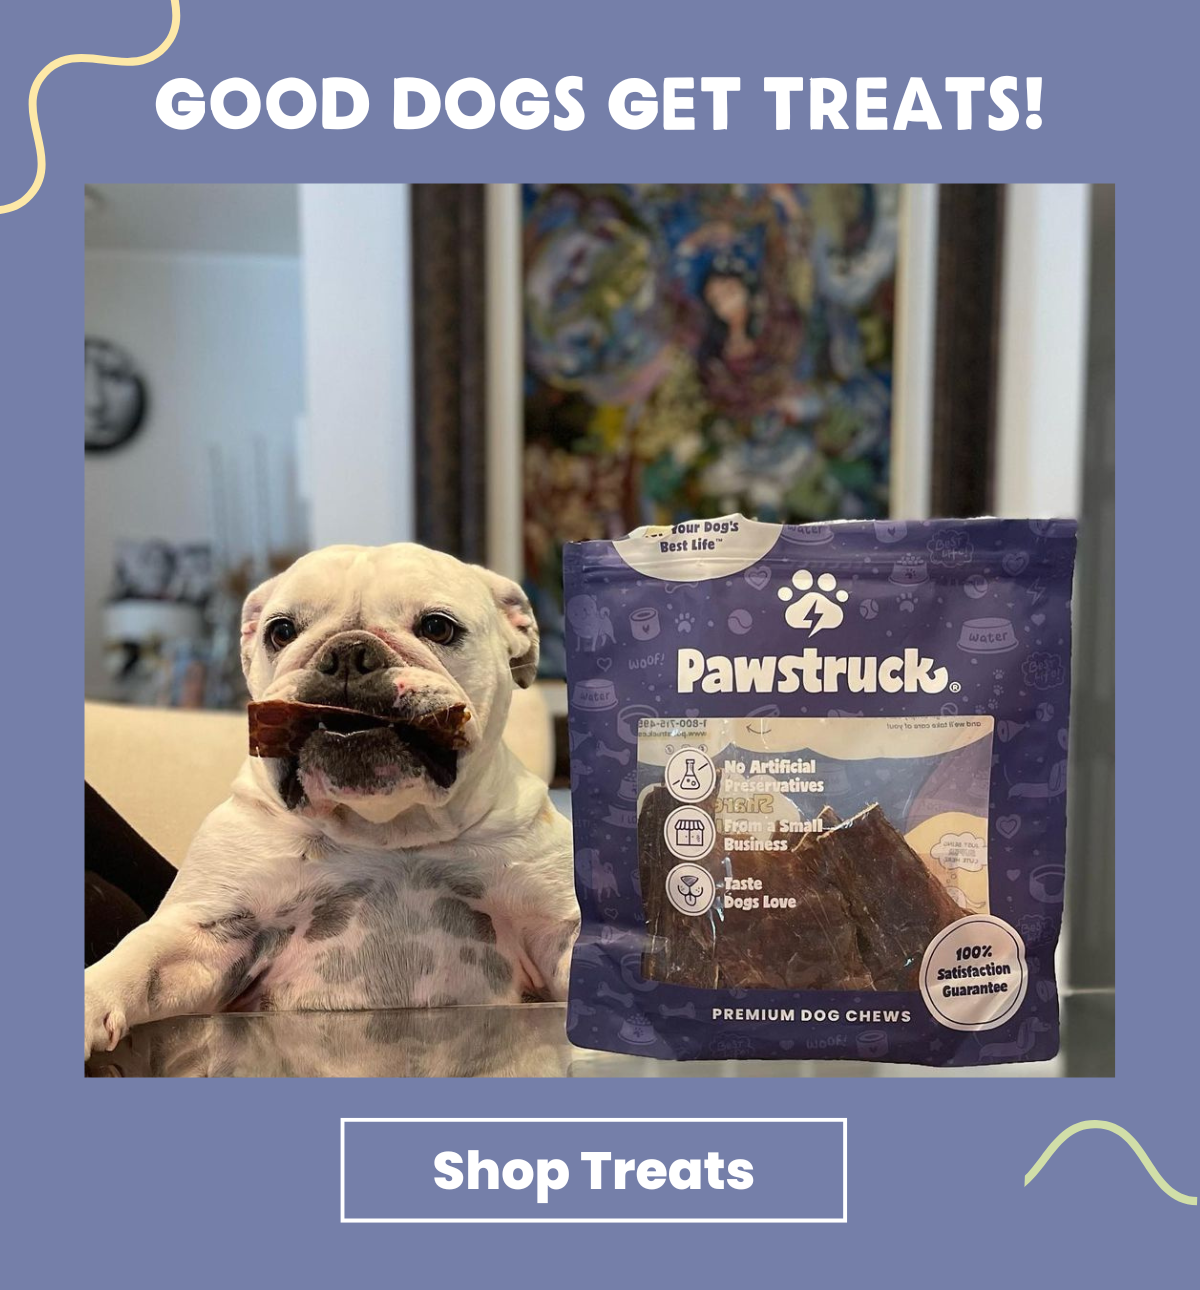 Good Dogs get treats and chews